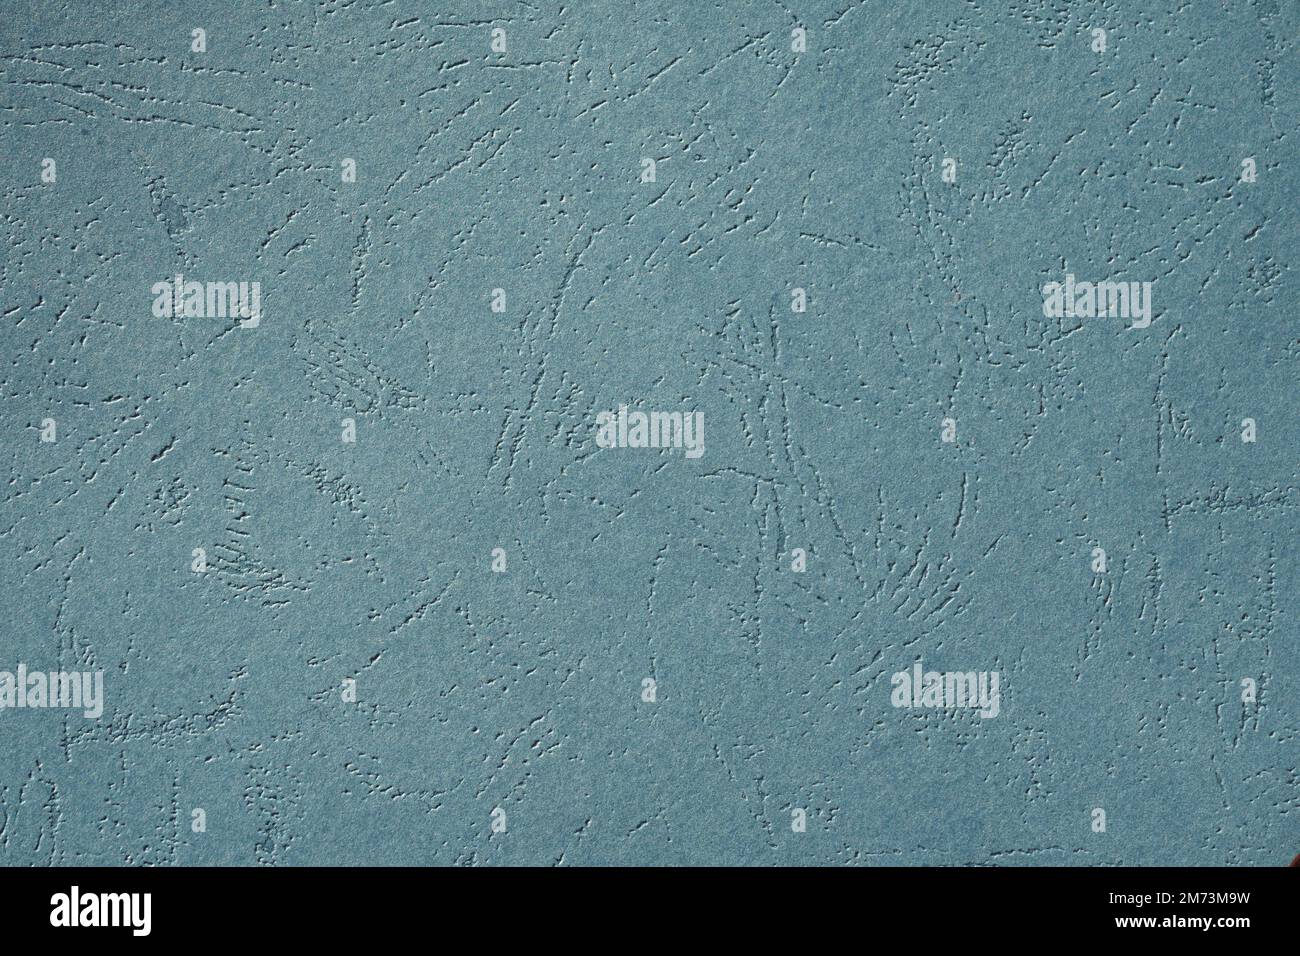 Closeup photo of cardboard sheet surface in gray color. Unicolor textured background. Stock Photo